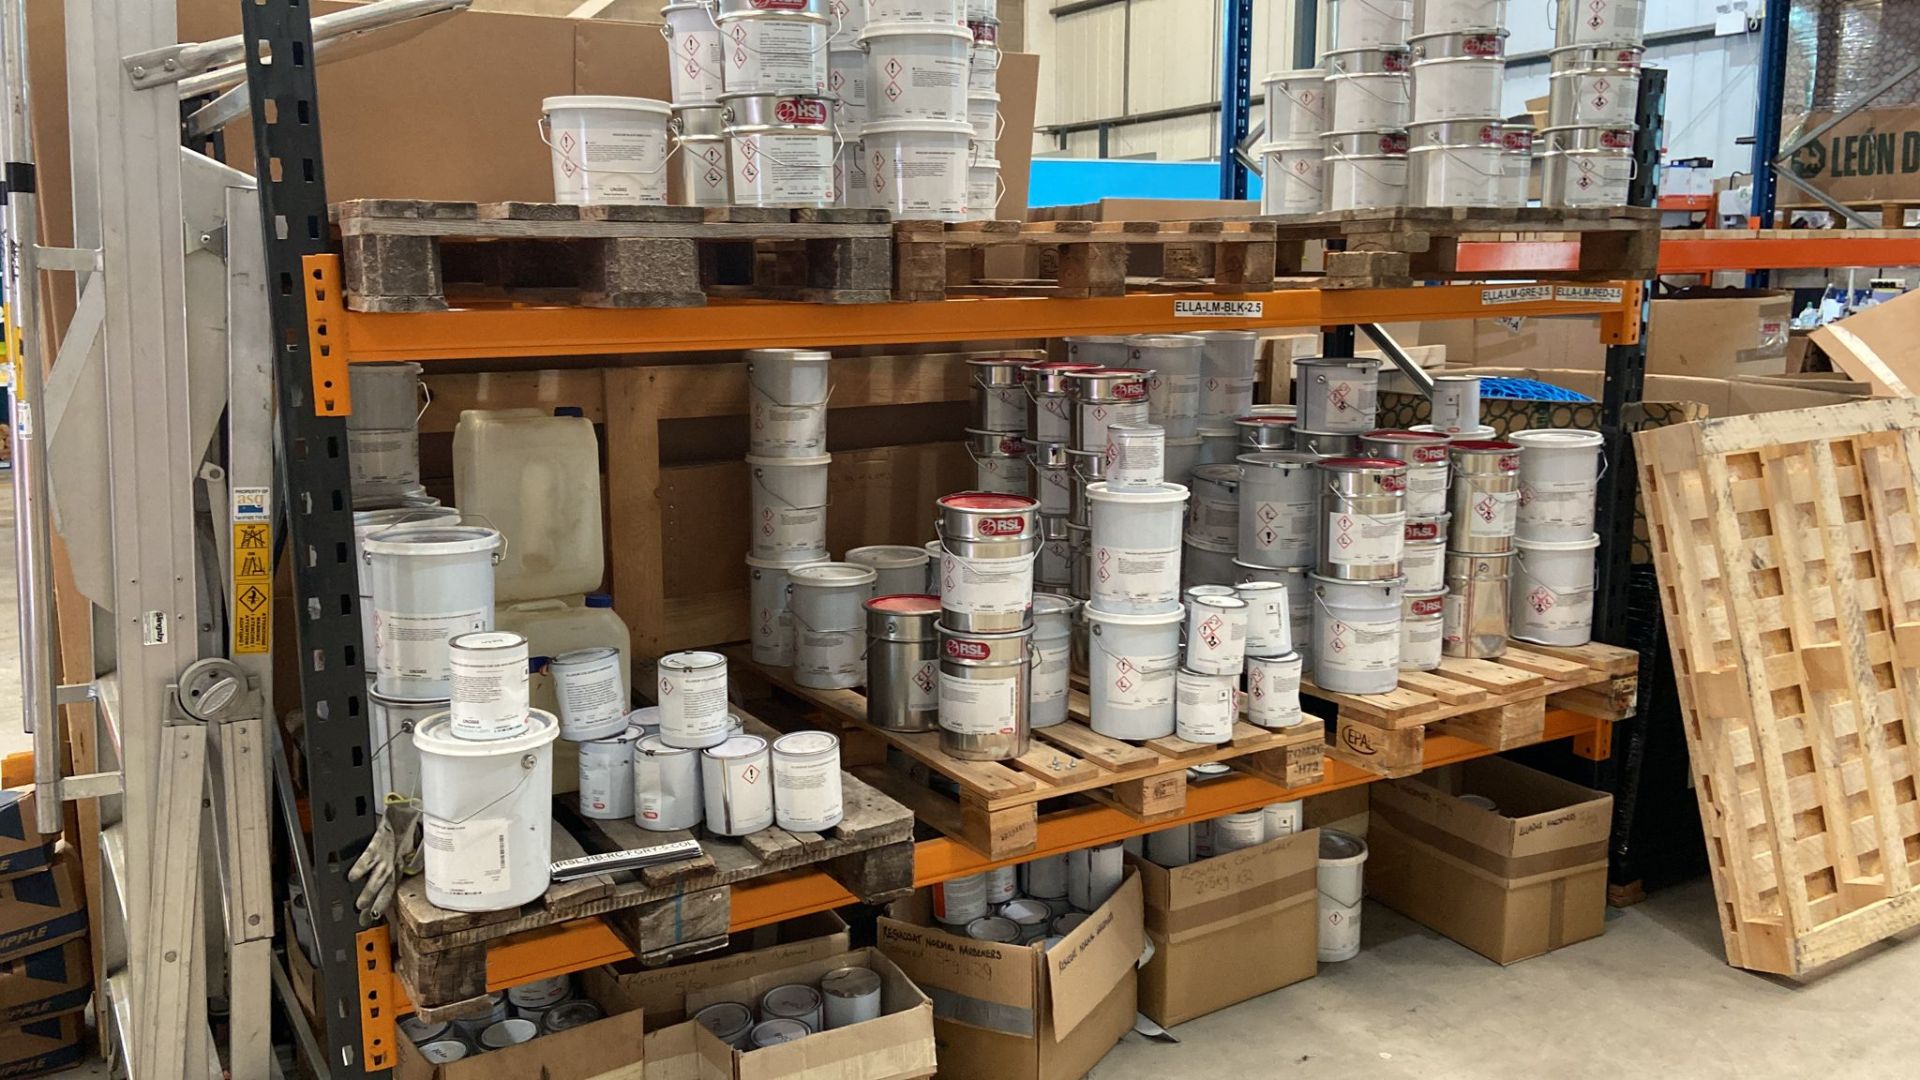 Quantity of Line Marking & Warehouse Safety Stock - Resins, Paints, Chalk, Tapes etc